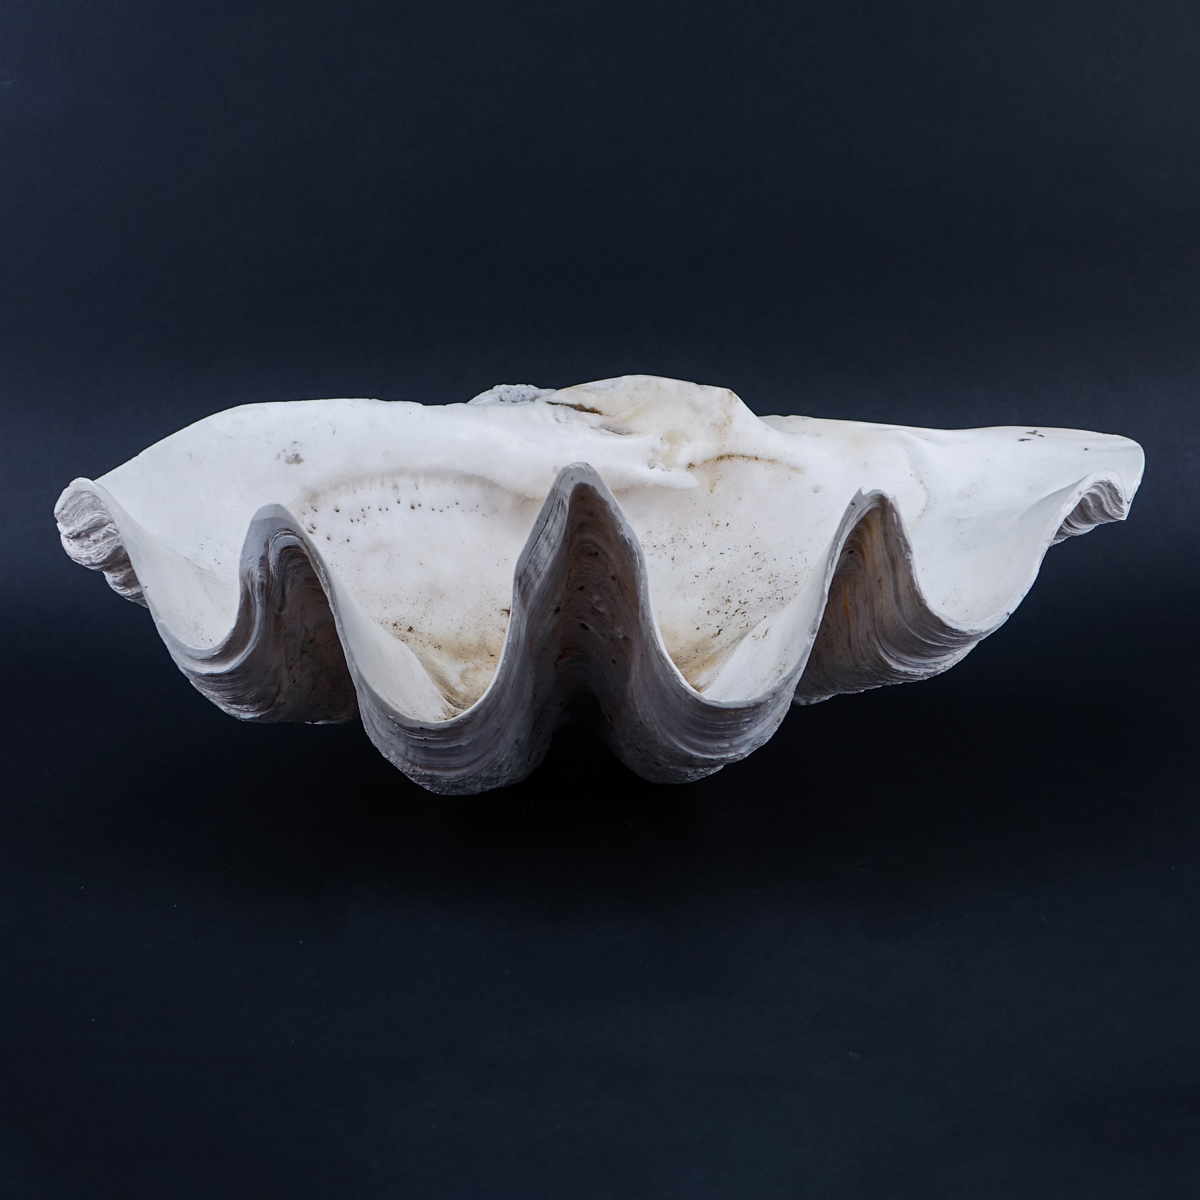 Giant Clam Shell. Chips or nicks to edge, water stains.